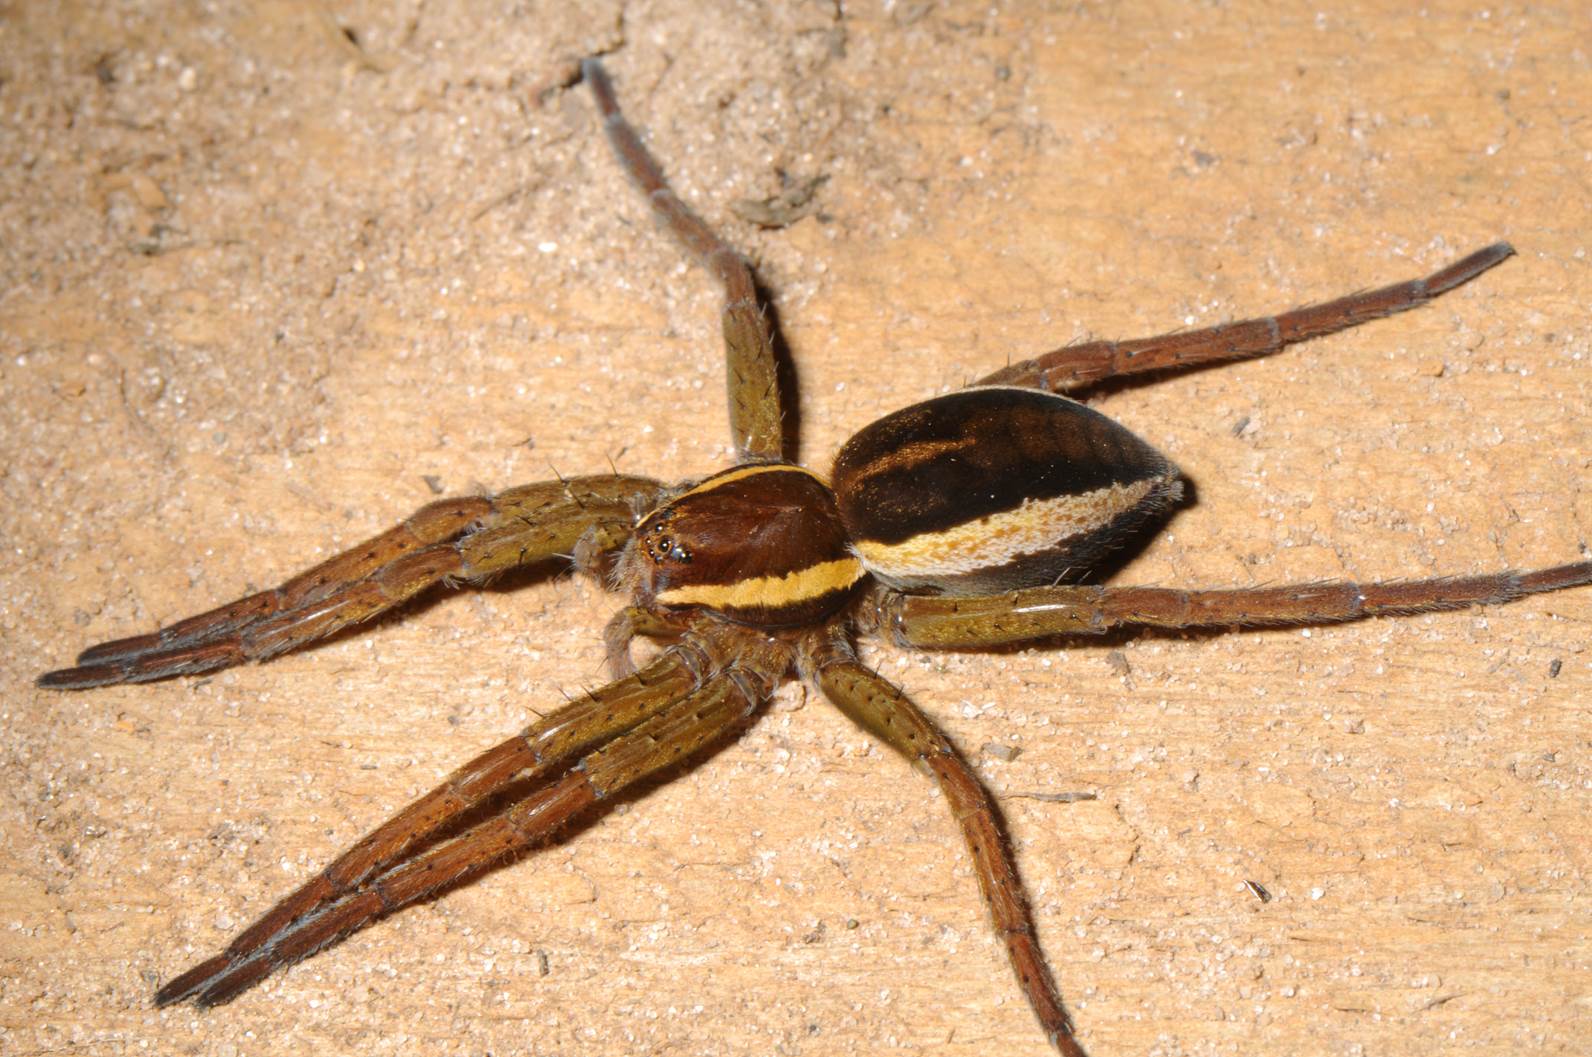 A close up of a spider

Description automatically generated